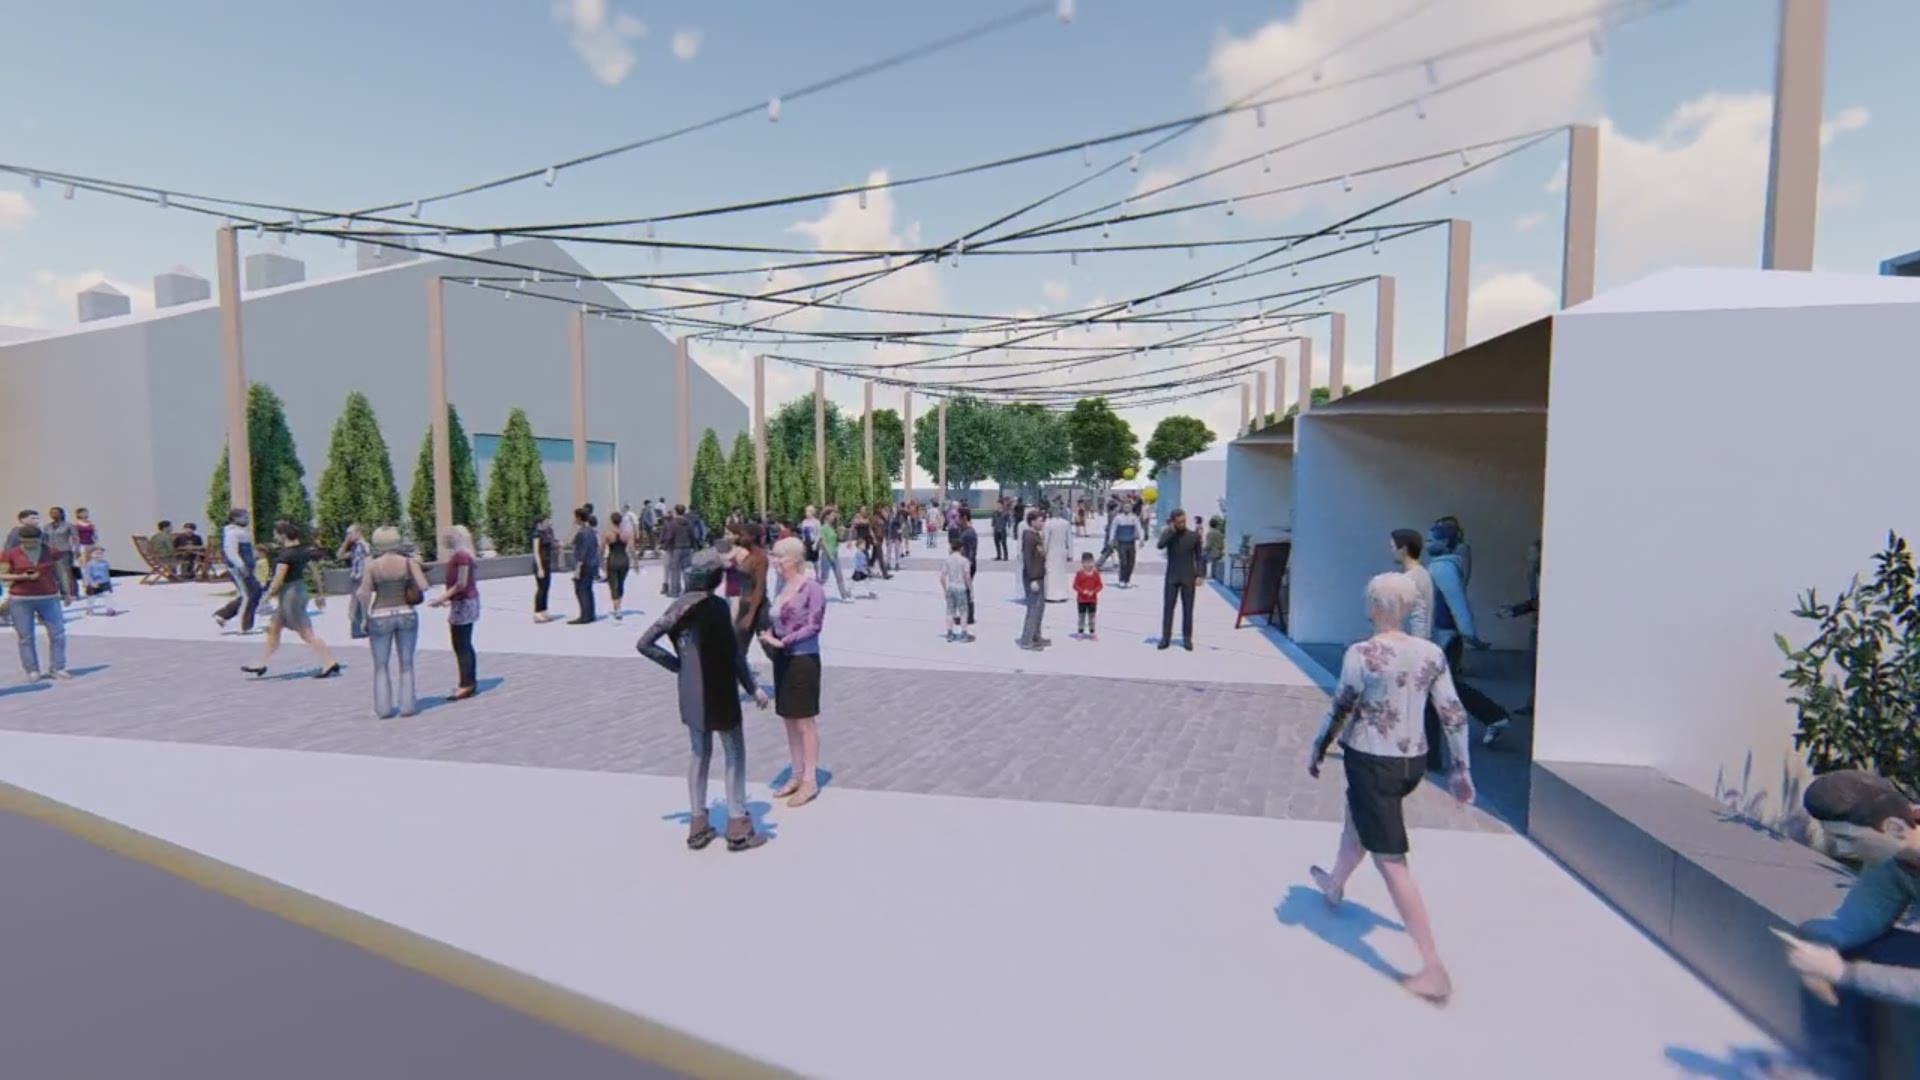 A rendering of new North End development planned for the Minnesota State Fair. https://kare11.tv/2U4zwOh